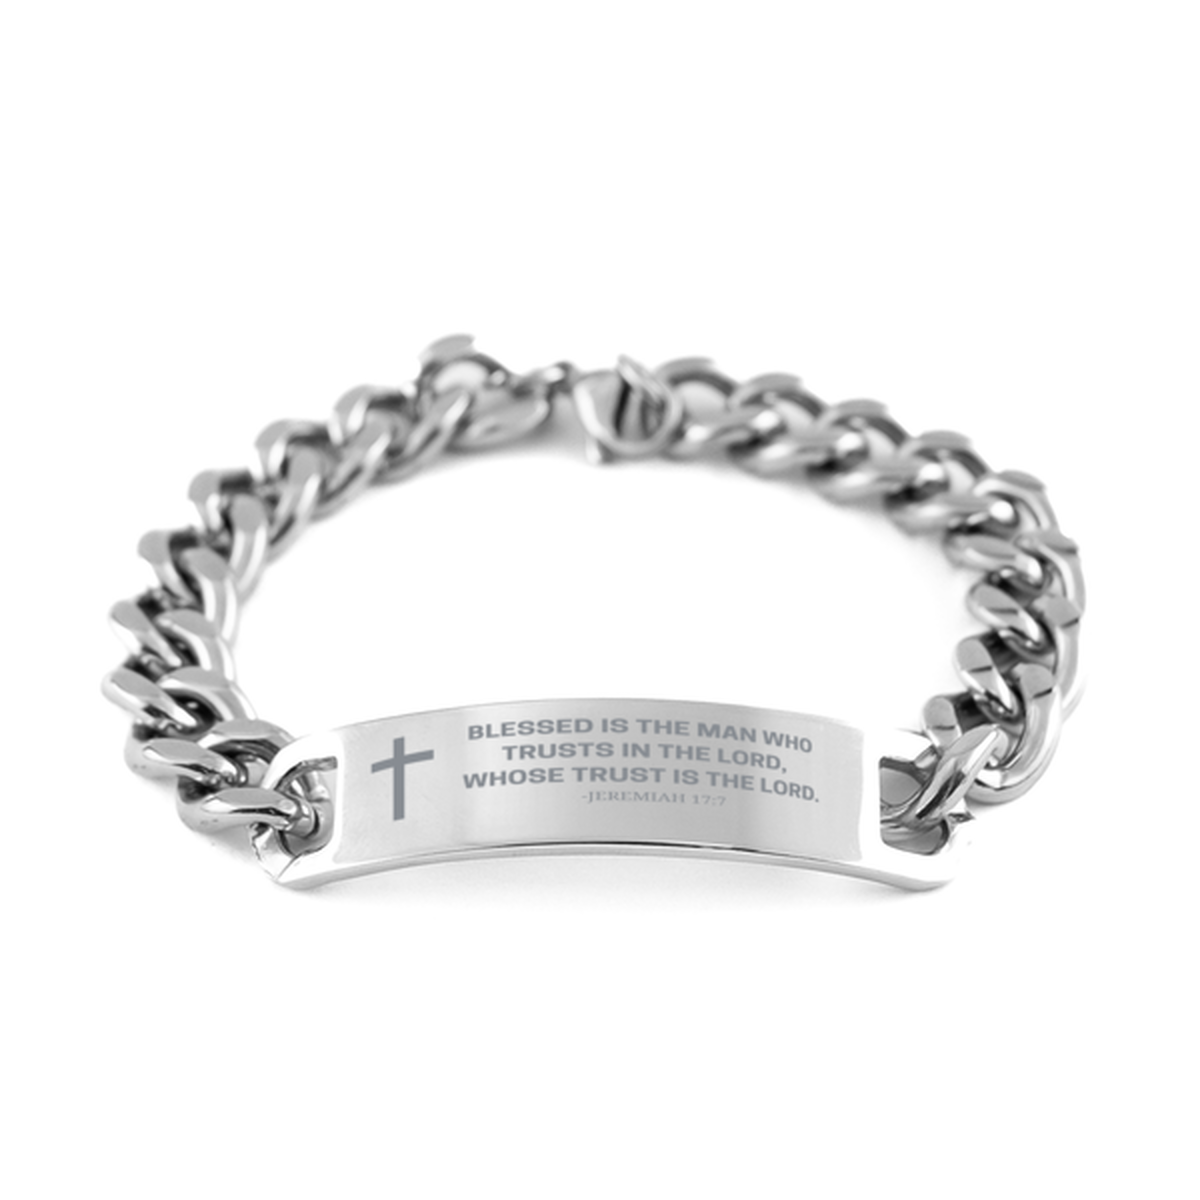 Baptism Gifts For Teenage Boys Girls, Christian Bible Verse Cuban Chain Bracelet, Blessed is the man who trusts, Catholic Confirmation Gifts for Son, Godson, Grandson, Nephew